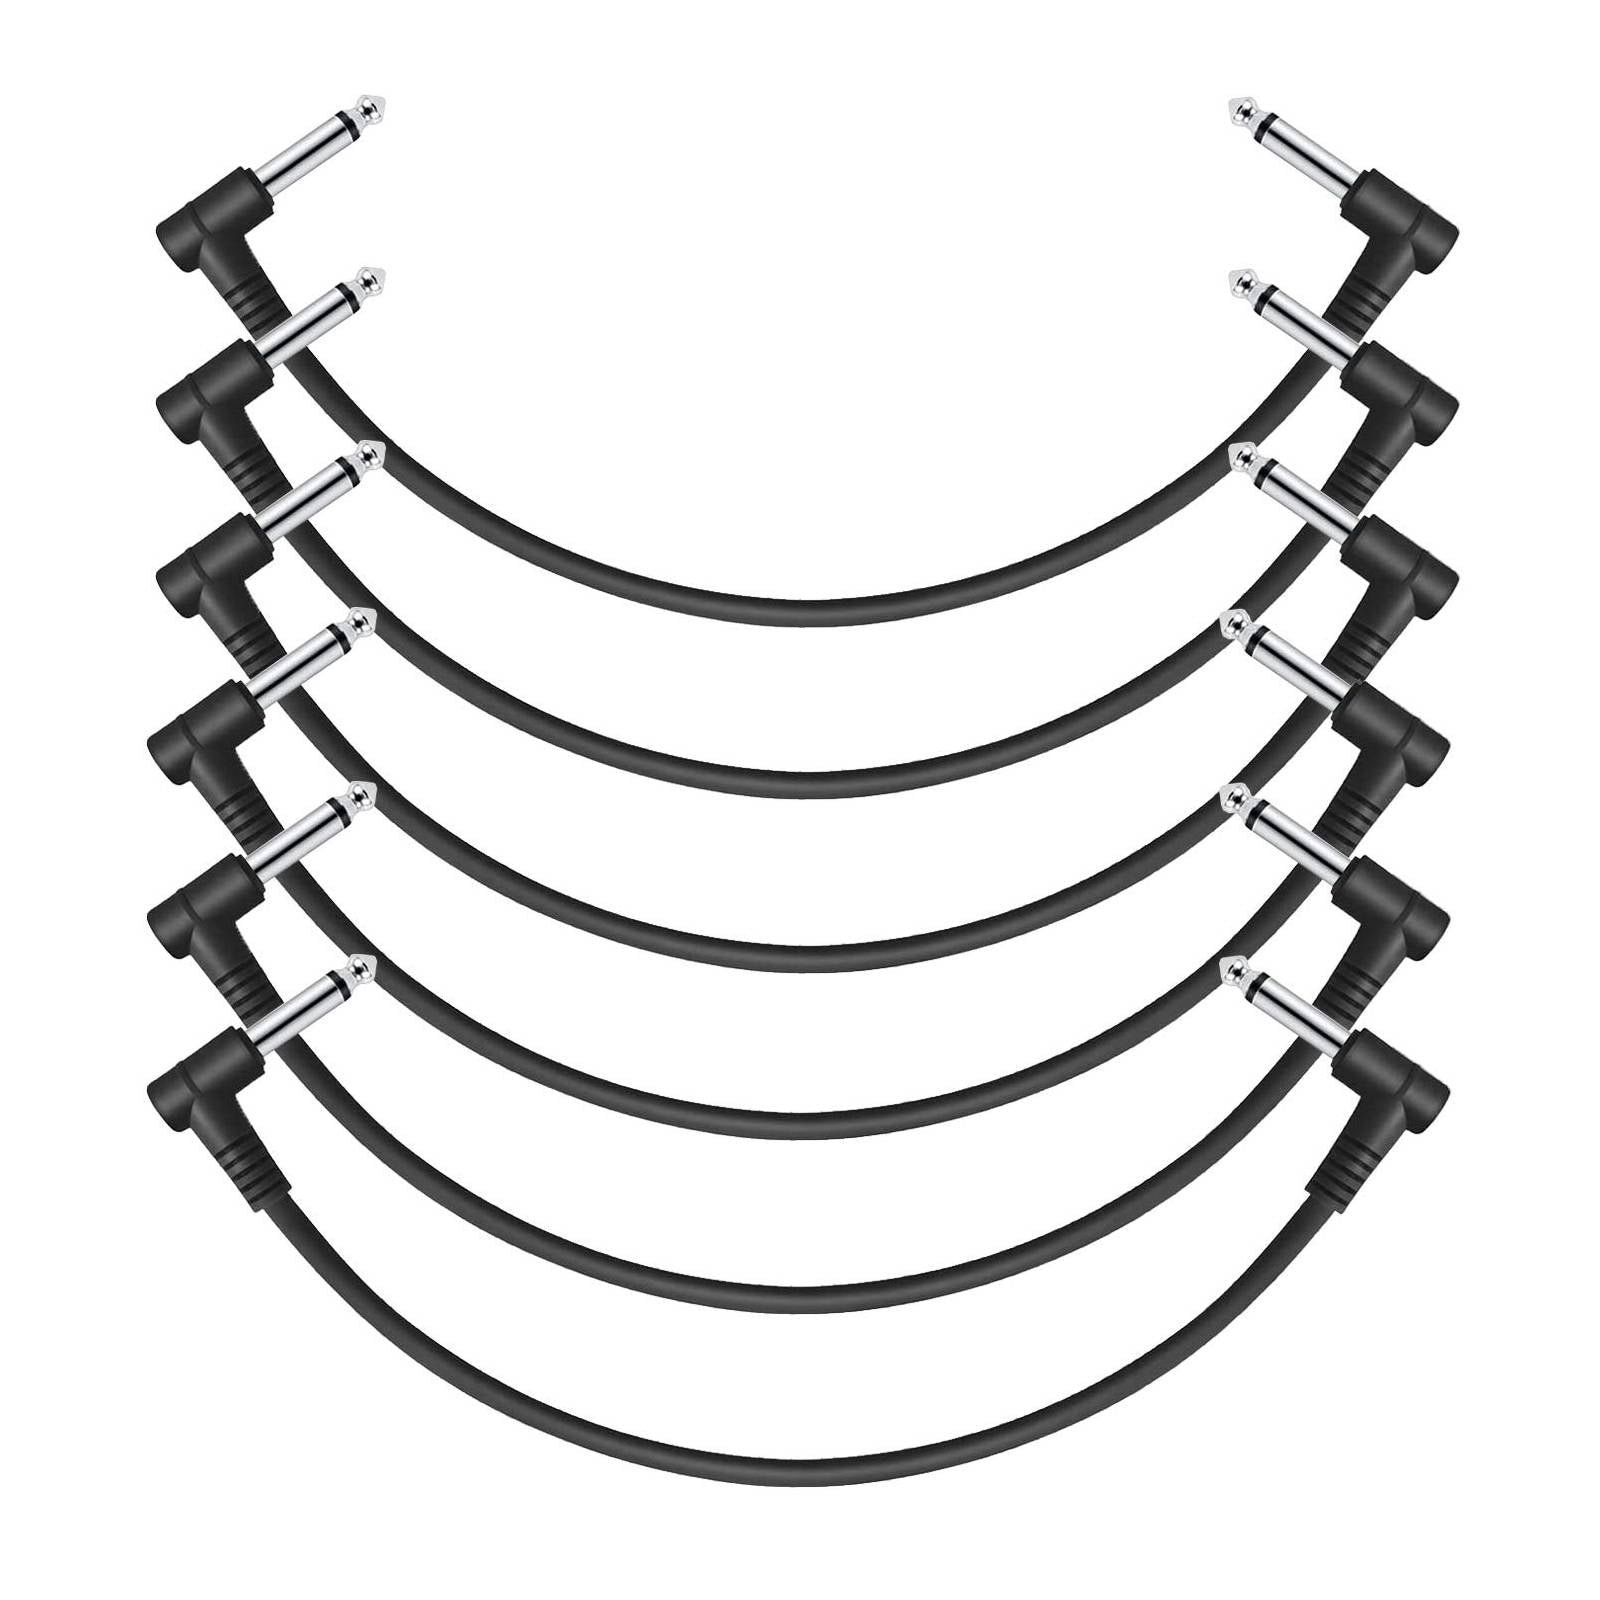 

Donner 12 Inch Guitar Patch Cable Guitar Effect Pedal Cables Black 6 Pack